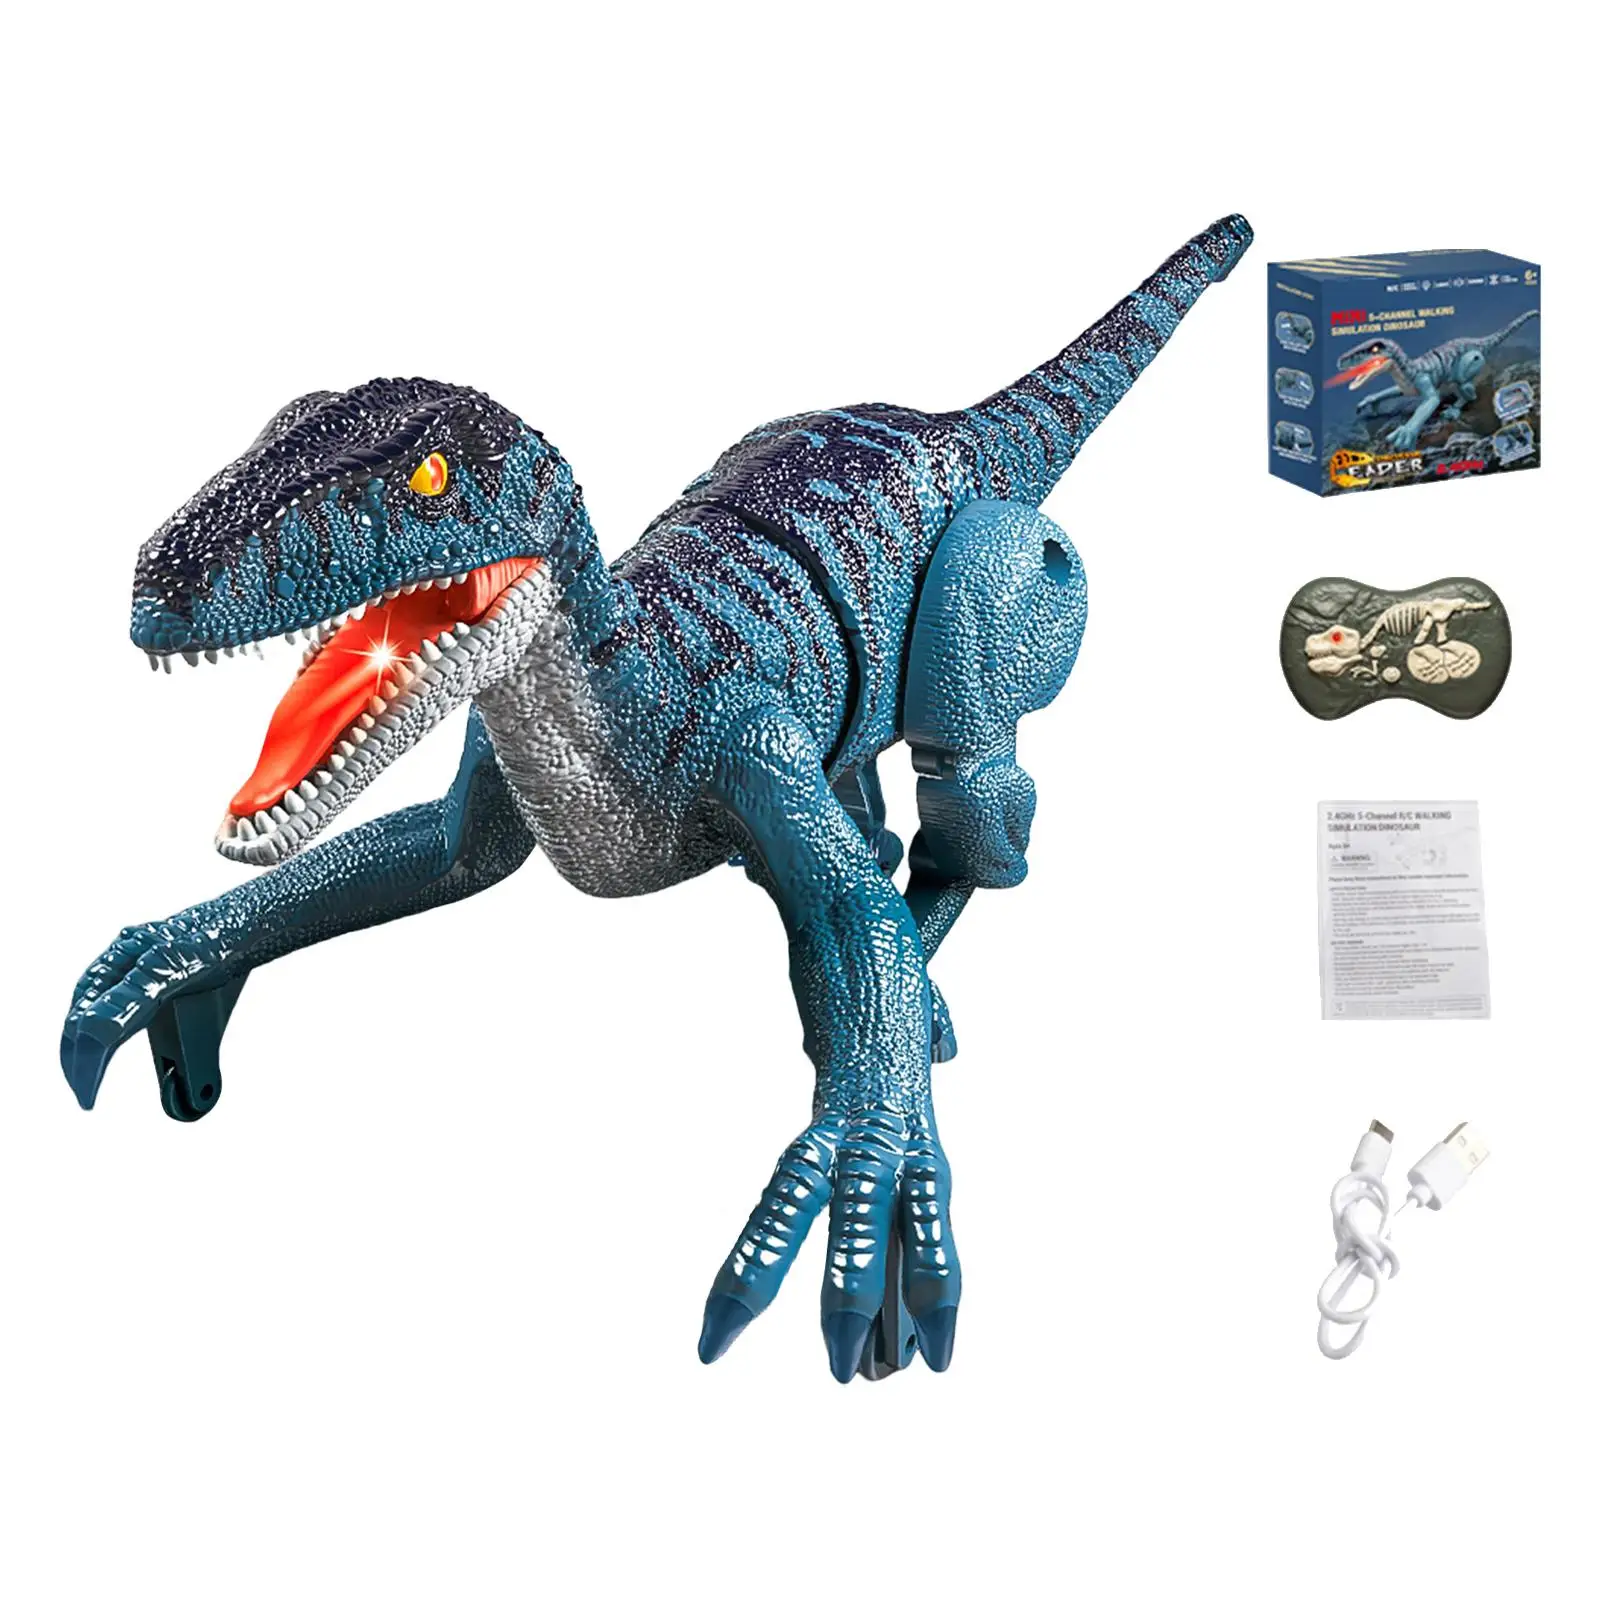 Robot Dinosaur Walking Dinosaur Toys with Sound and Light Remote Control Dinosaur Toys for Boys Children Toddlers Birthday Gifts